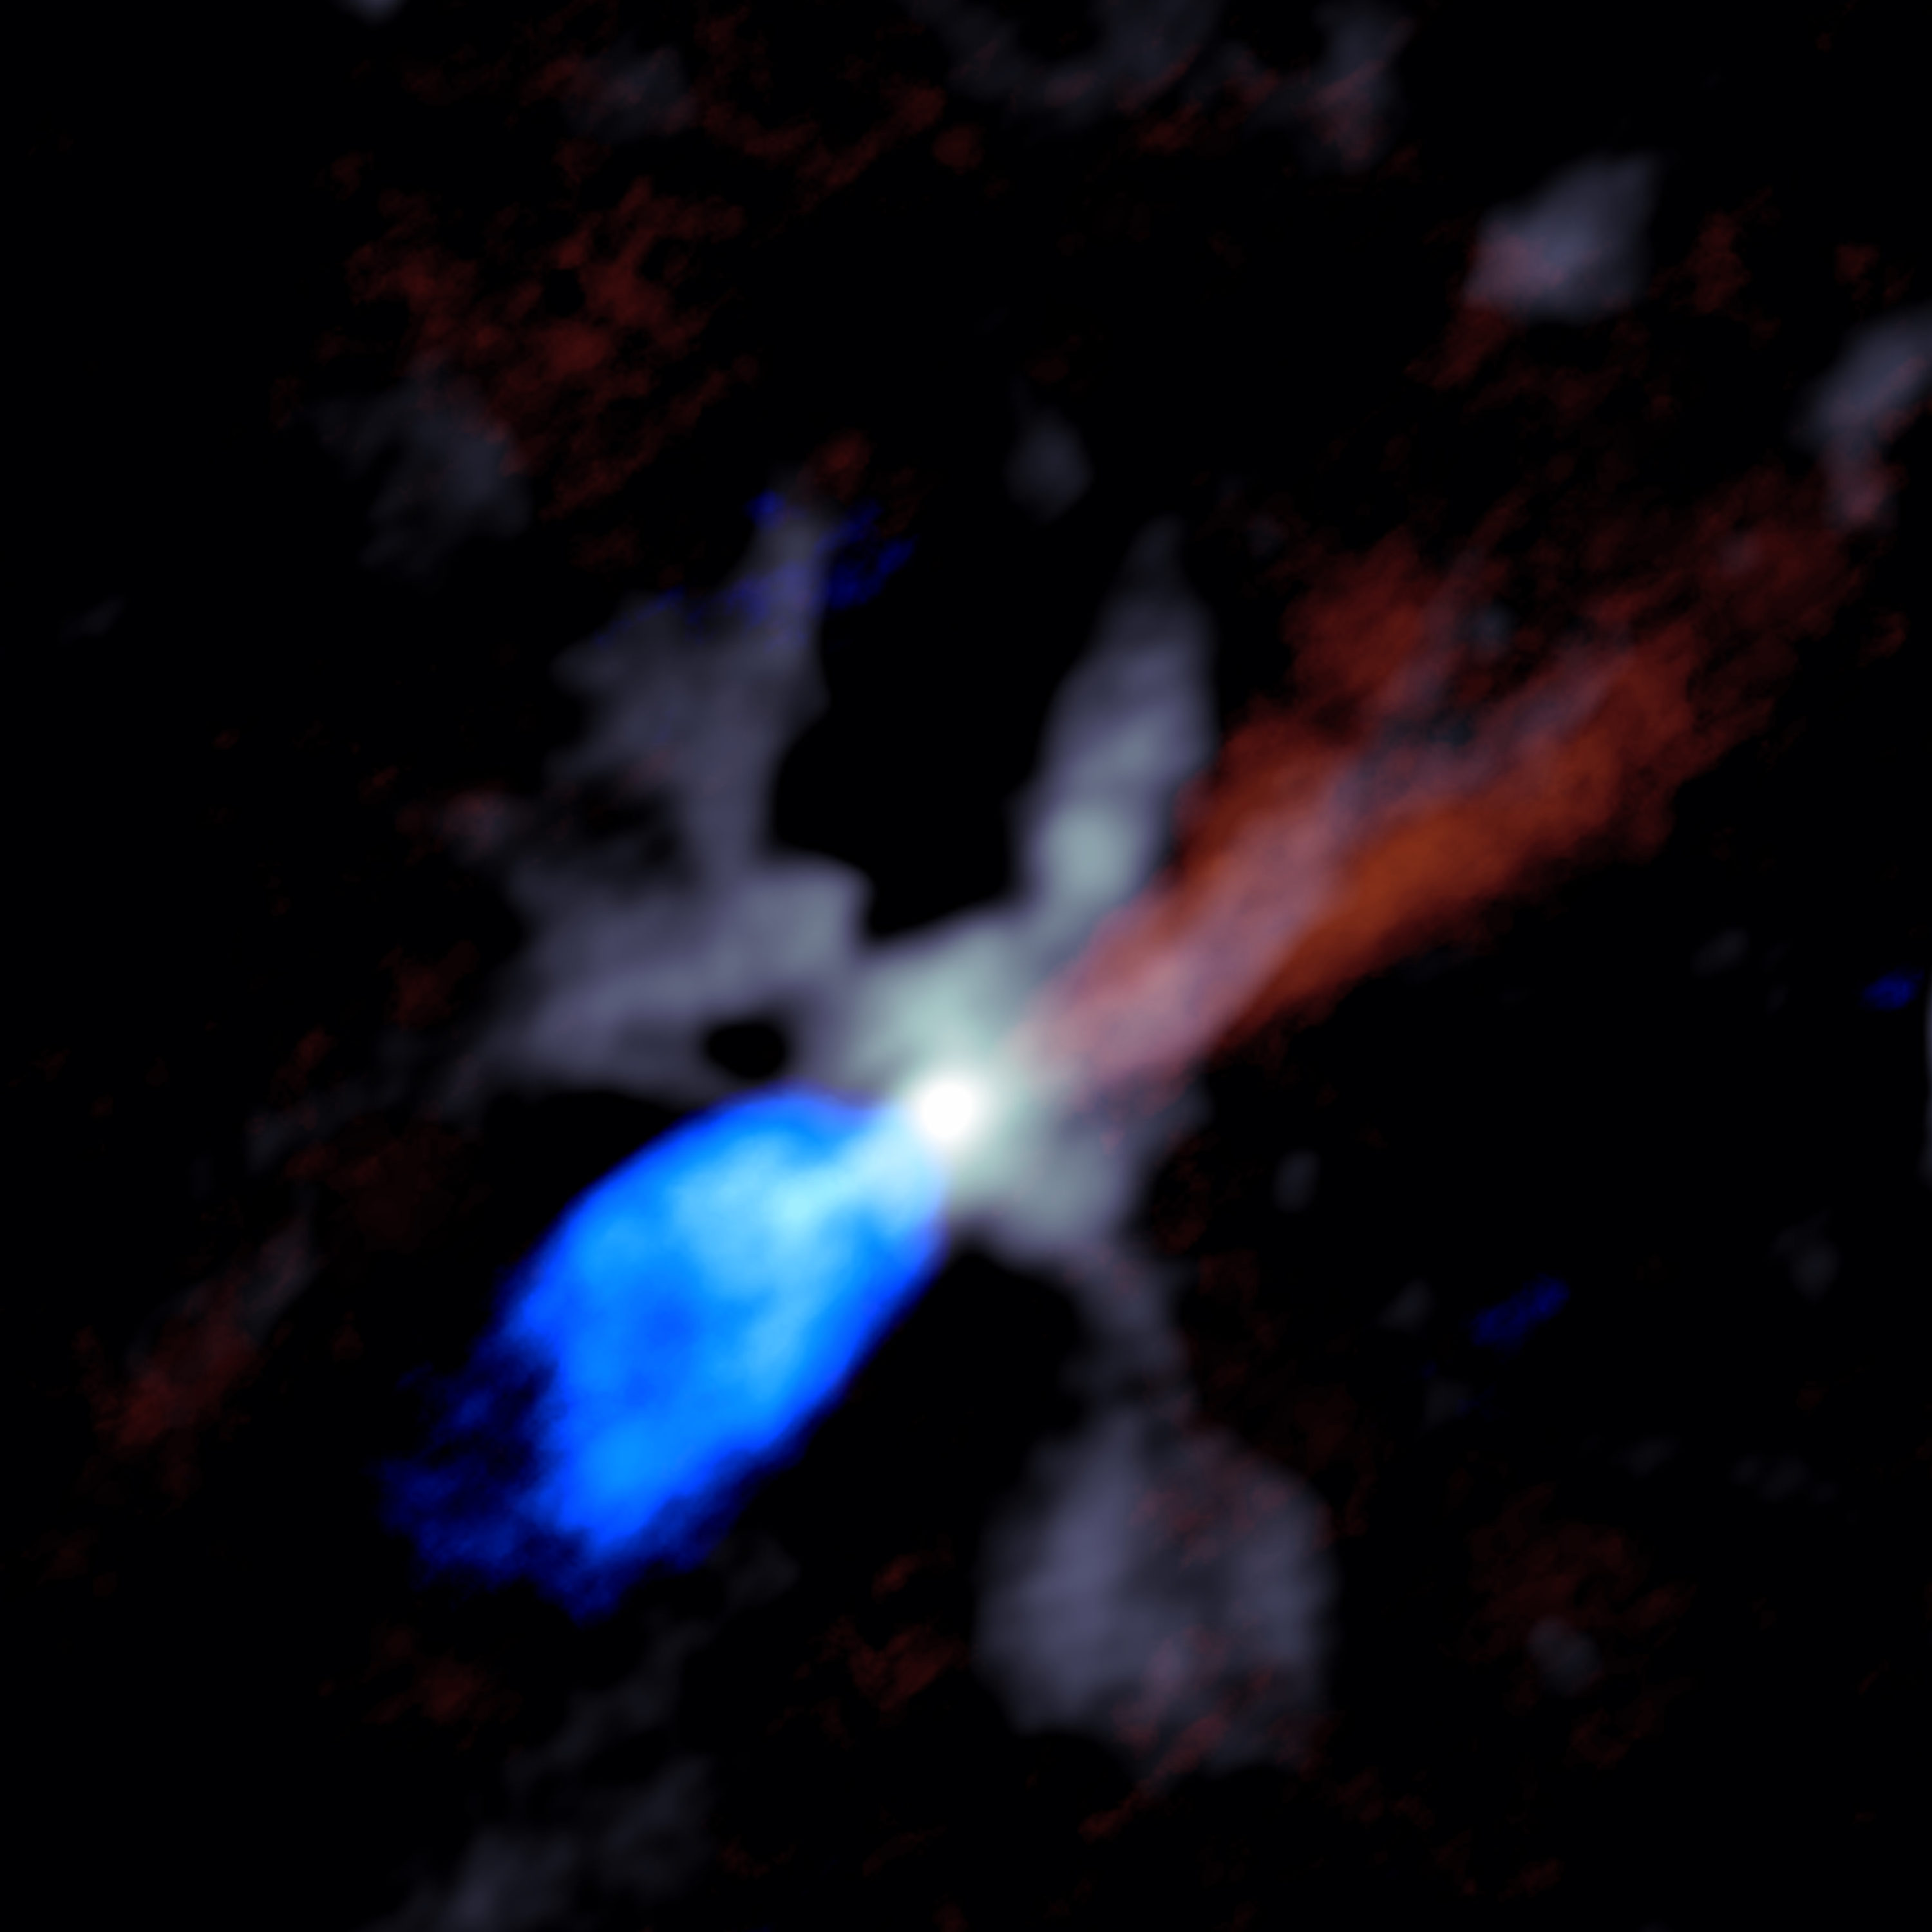 ALMA image of the chaotic scene around a massive young protostar, in this case one called W51e2e. Grey shows dust close to the star, while the red and blue indicate material in the jets moving rapidly outward from the star. Red shows material moving away from Earth and blue material moving toward Earth. Credit: Goddi, Ginsburg, et al., Sophia Dagnello, NRAO/AUI/NSF.